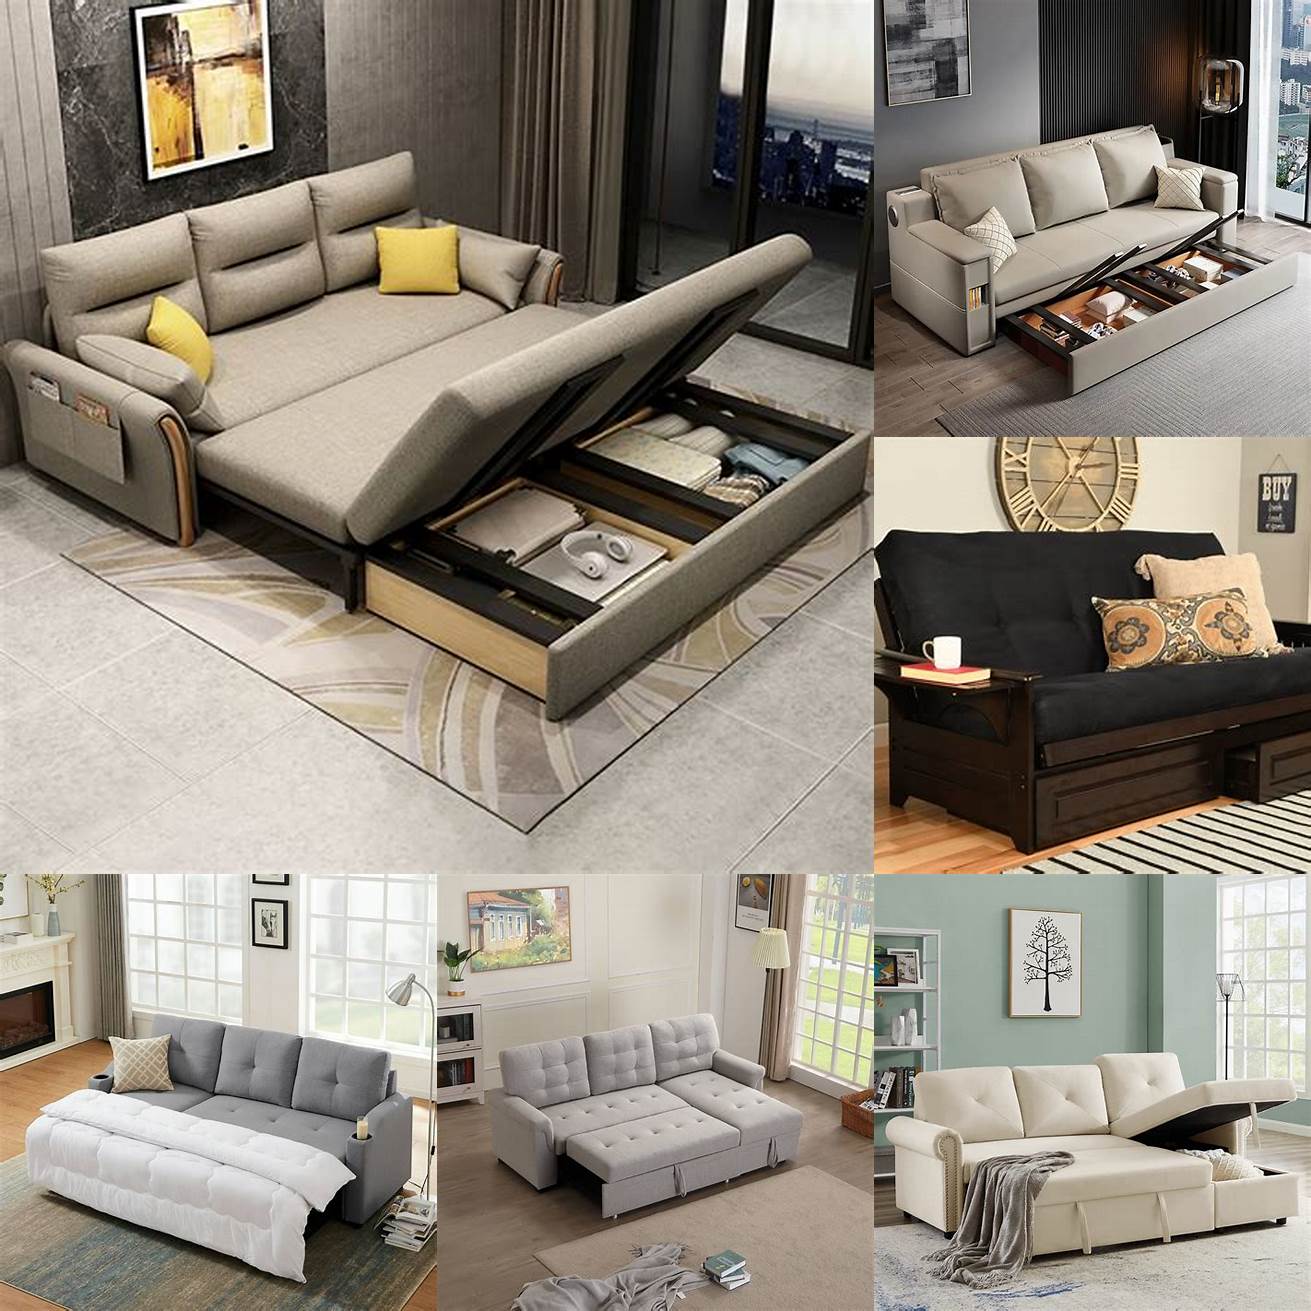 Sofa bed with built-in storage